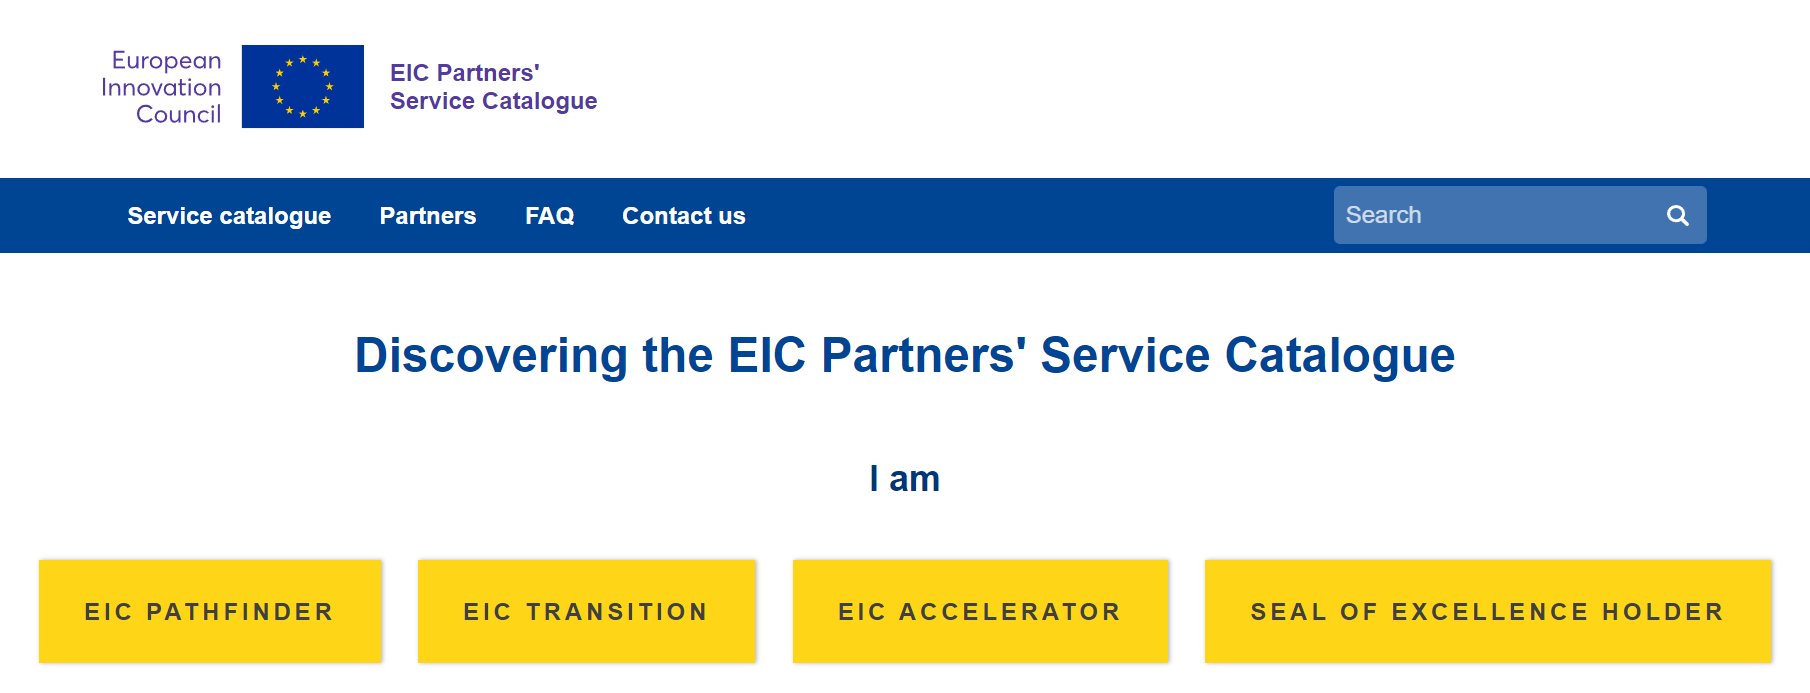 EIC Partners' Service Catalogue Homepage with funding instruments